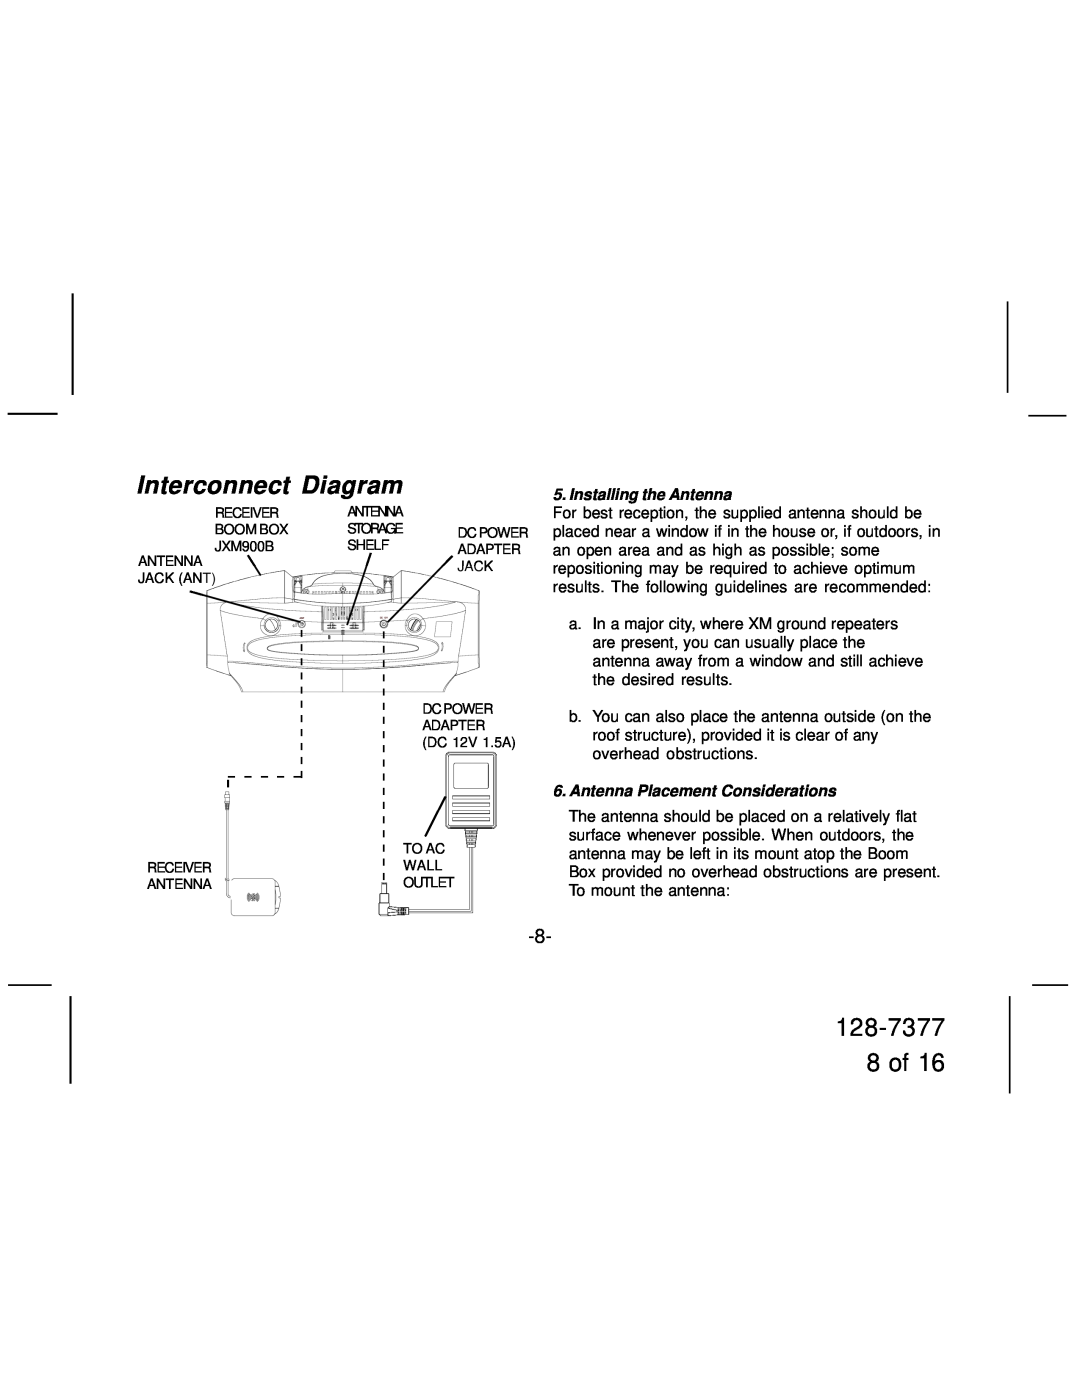 Jensen JXM900B manual Interconnect Diagram, 128-7377 8 of, Installing the Antenna, Antenna Placement Considerations 